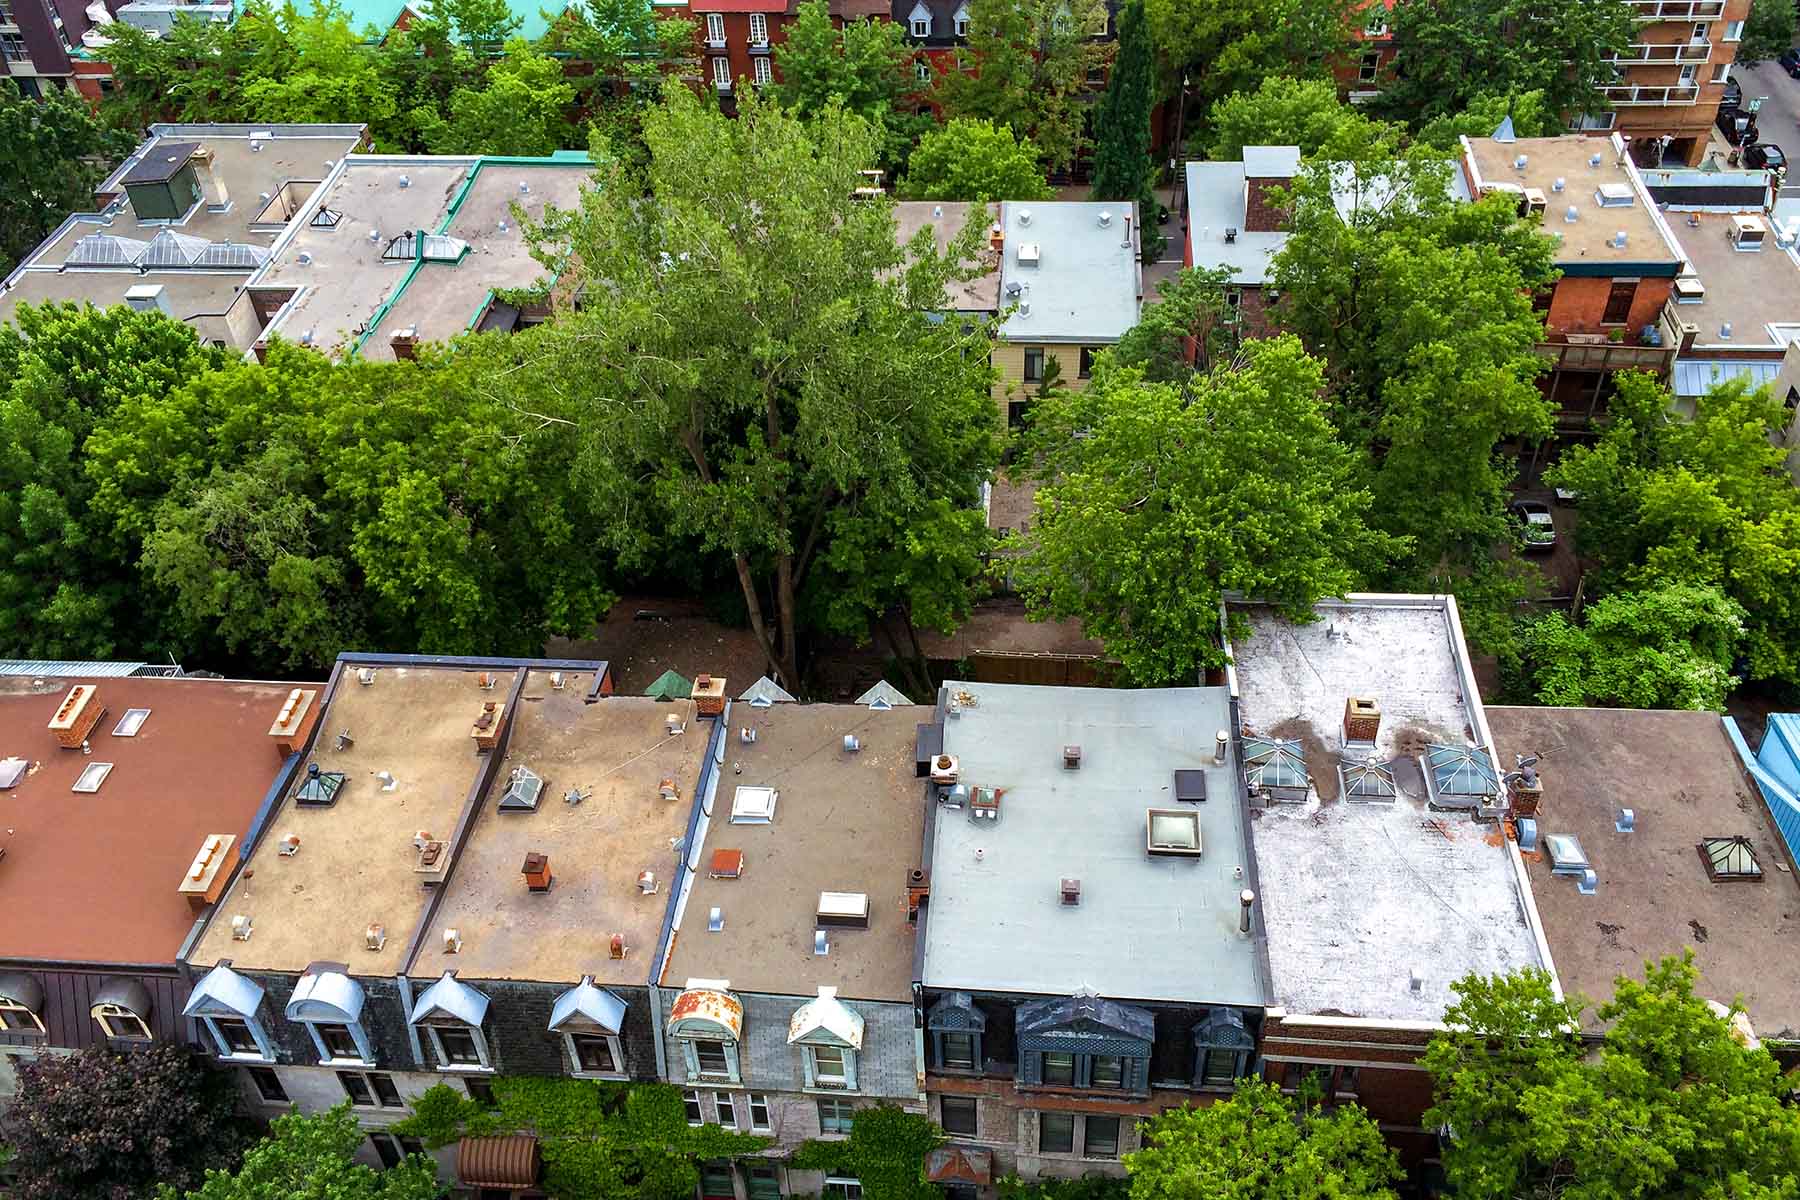 An aerial view on Montreal, looking down on lush trees and the rooves of buildings.